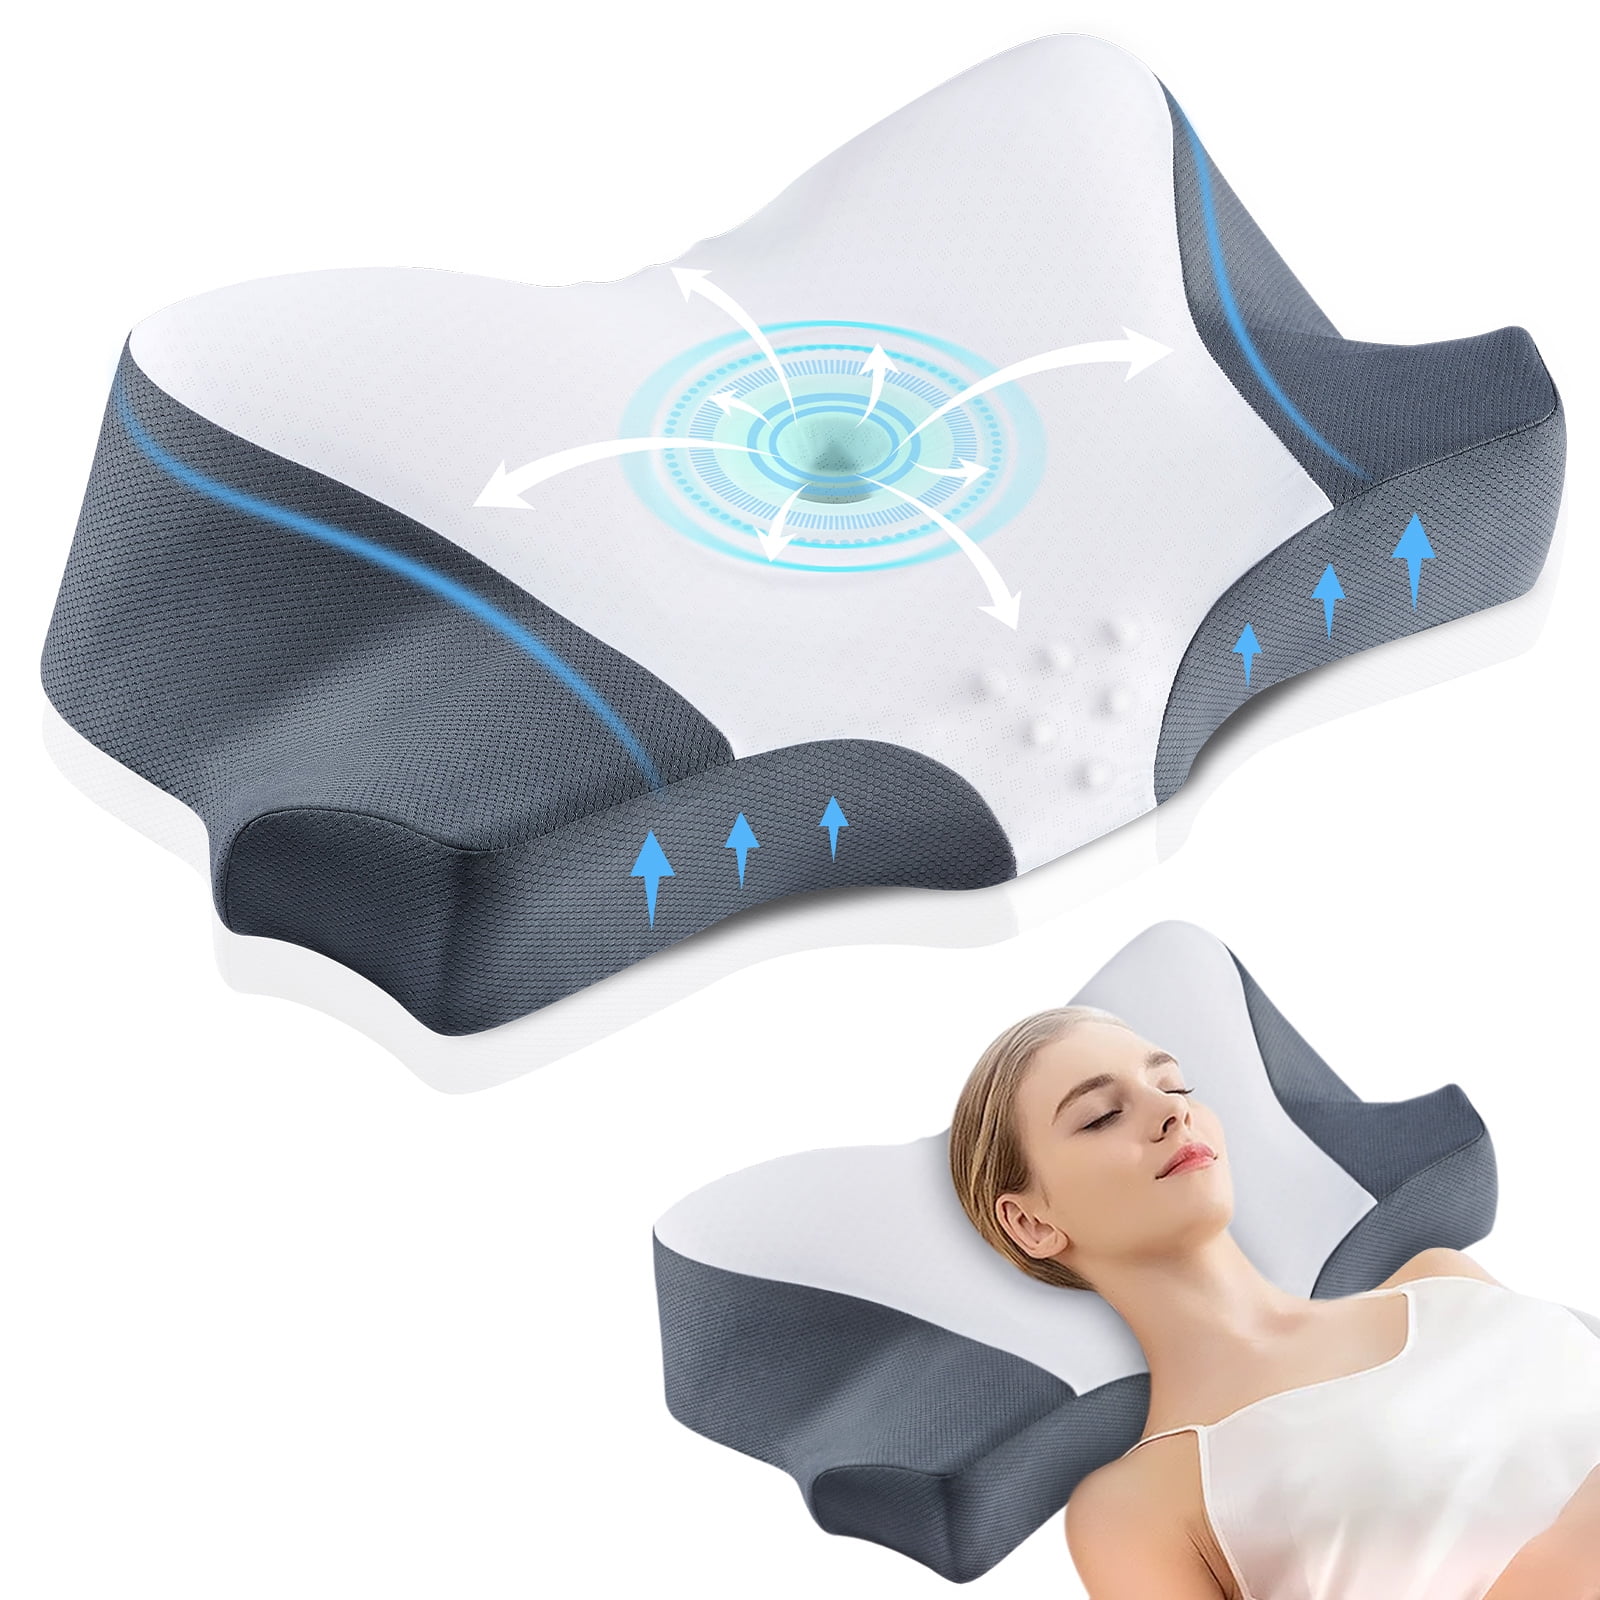 Cushion Lab Extra Dense Ergonomic Cervical Pillow for Firm Neck Support - Orthopedic Contour Pillow for Back/Side Sleeper Neck Relief